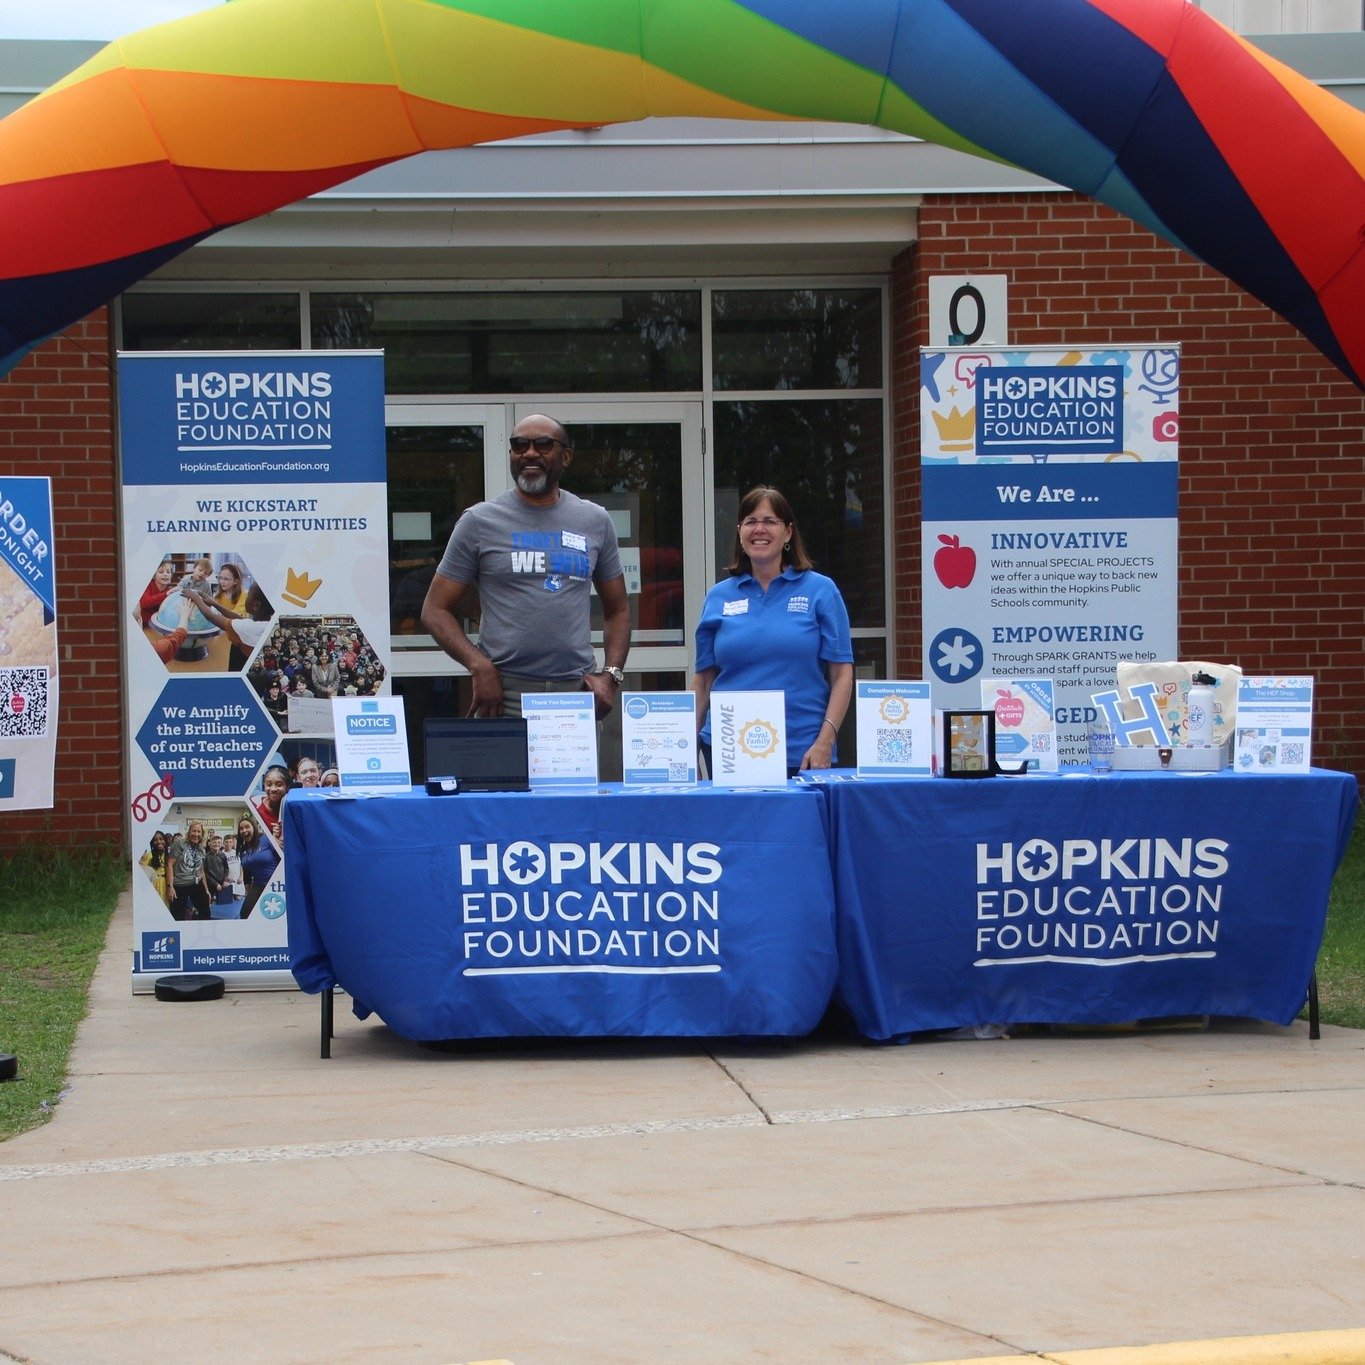 We had a LOT of fun yesterday at Royal Family Fun Day. Thank you to all of you who brought your kids to play and connect with us -- more than 600 of you in all! And thank you to @hopkinscommunityeducation , and everyone who supported this event. If o